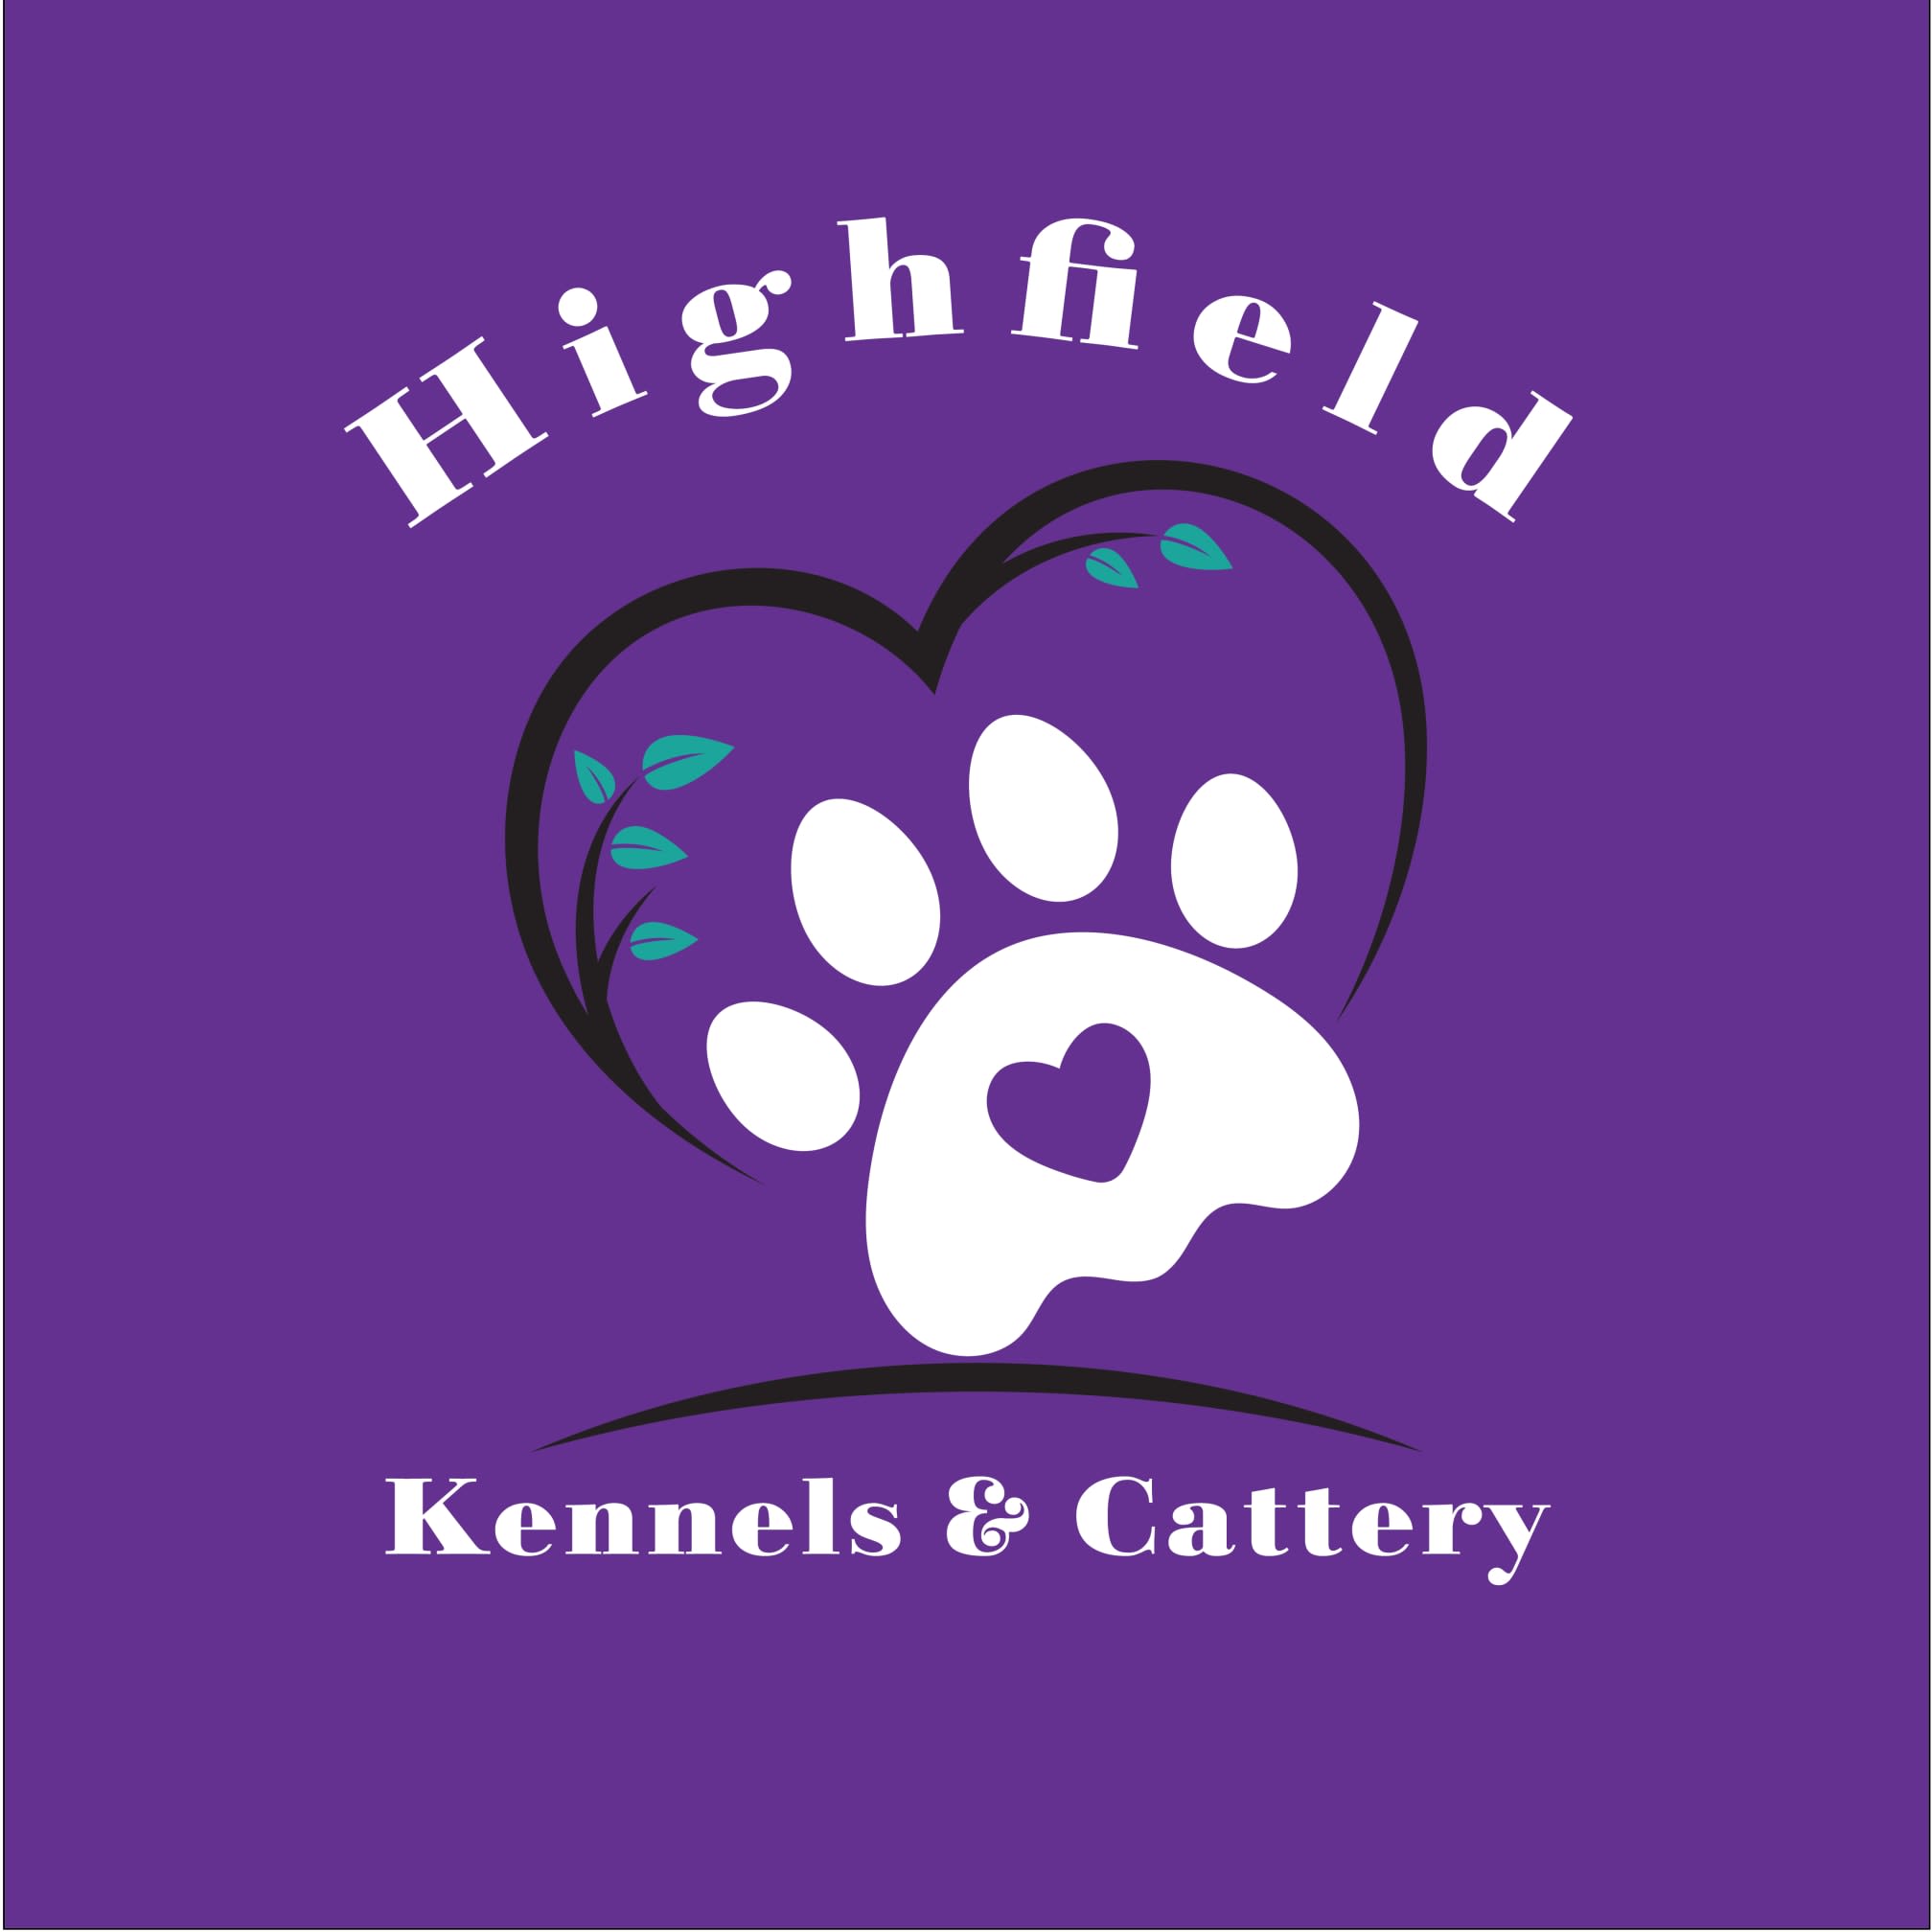 Highfield Kennels & Cattery Banwell 07835 824533